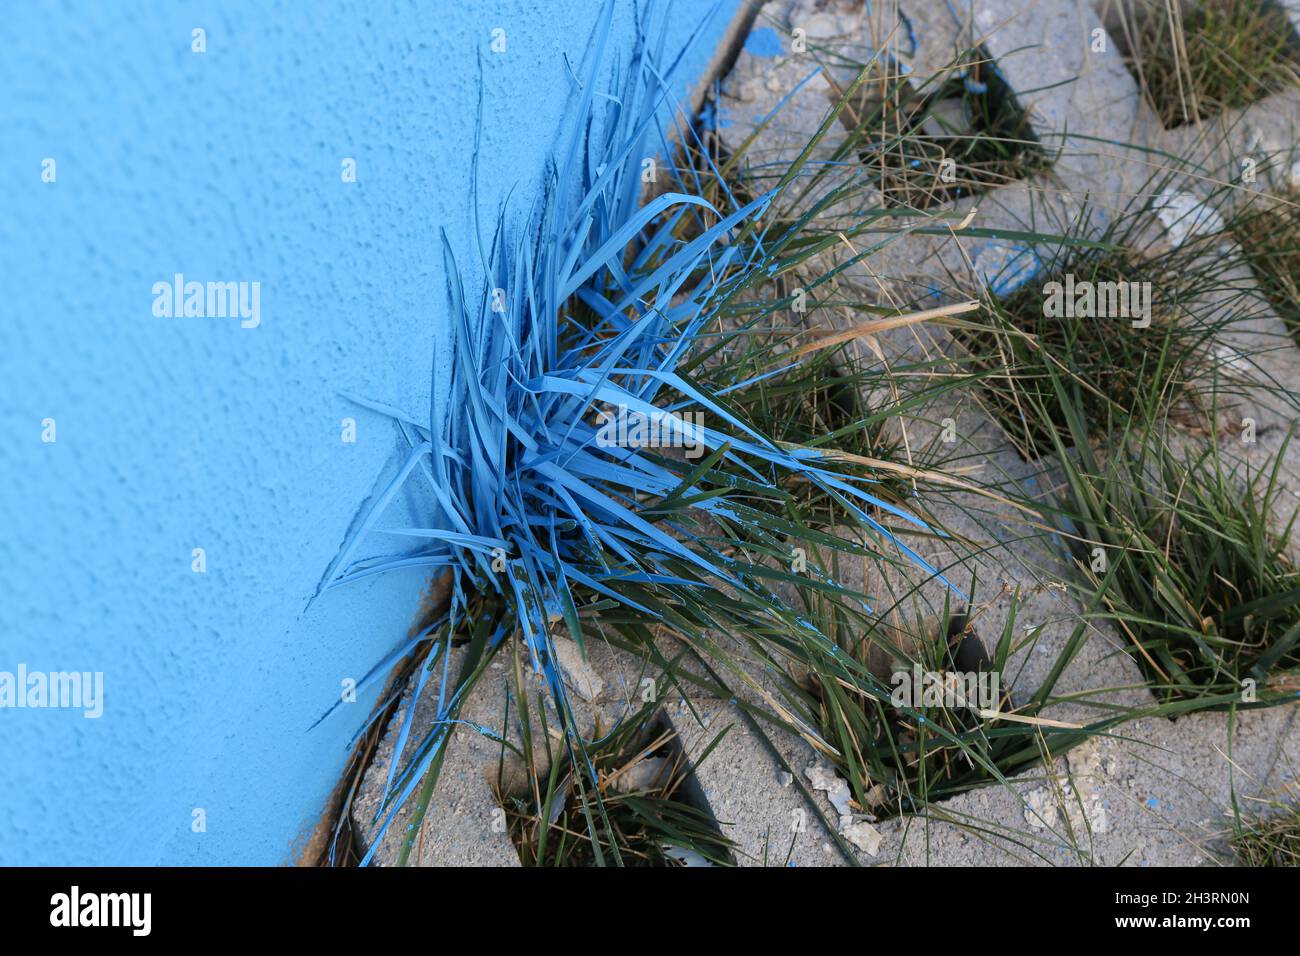 One wall was painted blue, while the grass was painted. Hope concept. Nature destruction concept. Stock Photo